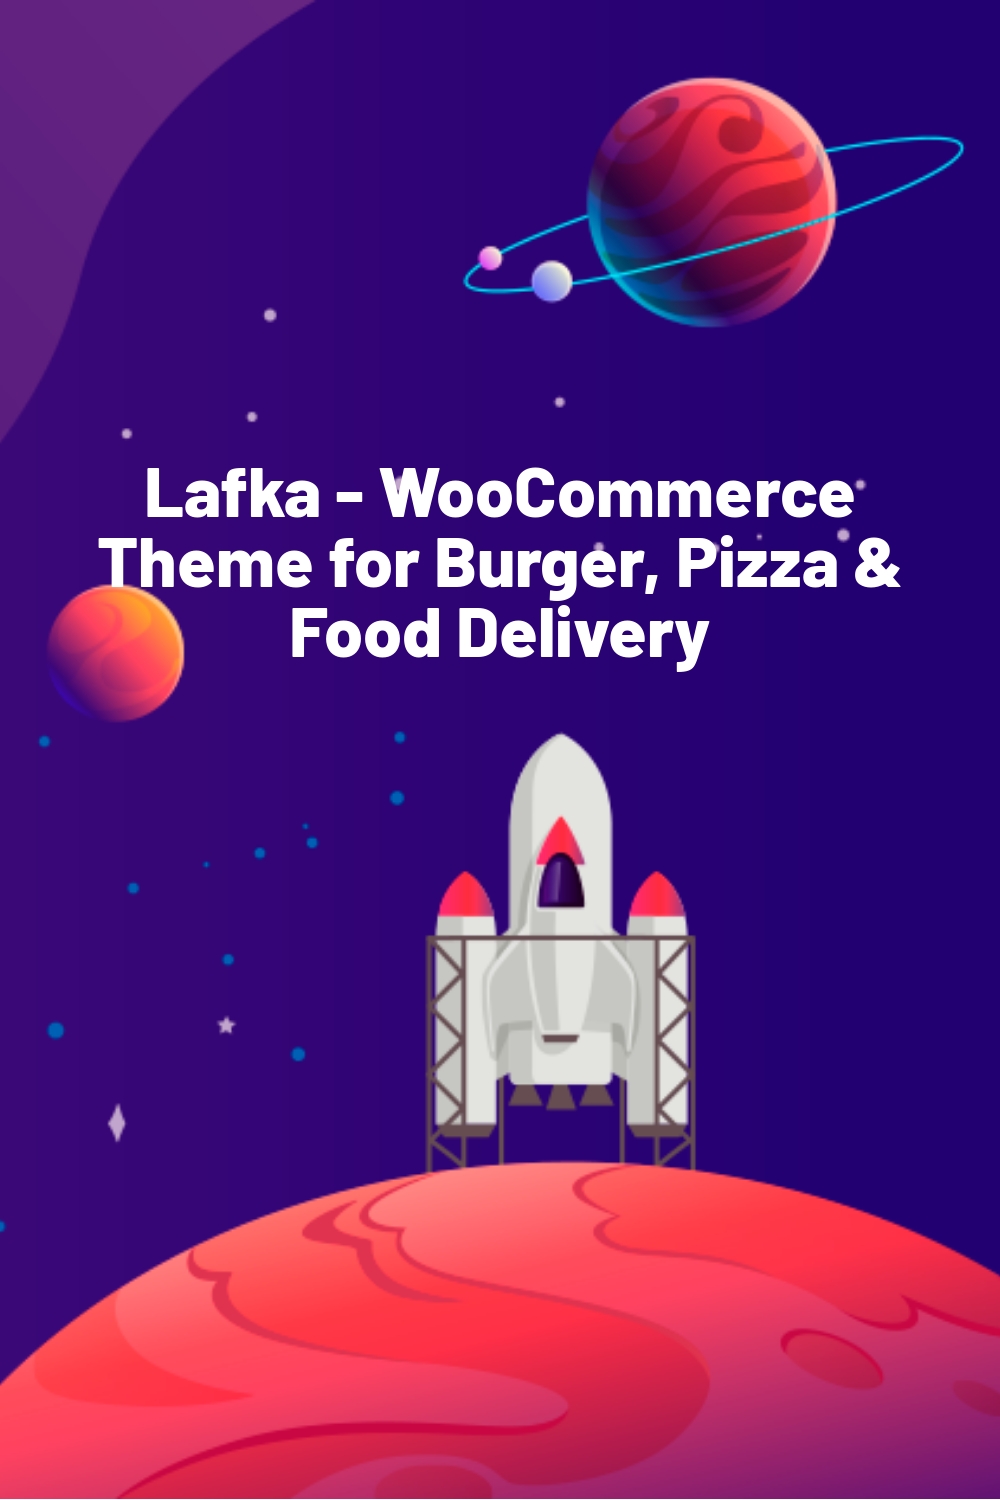 Lafka – WooCommerce Theme for Burger, Pizza & Food Delivery